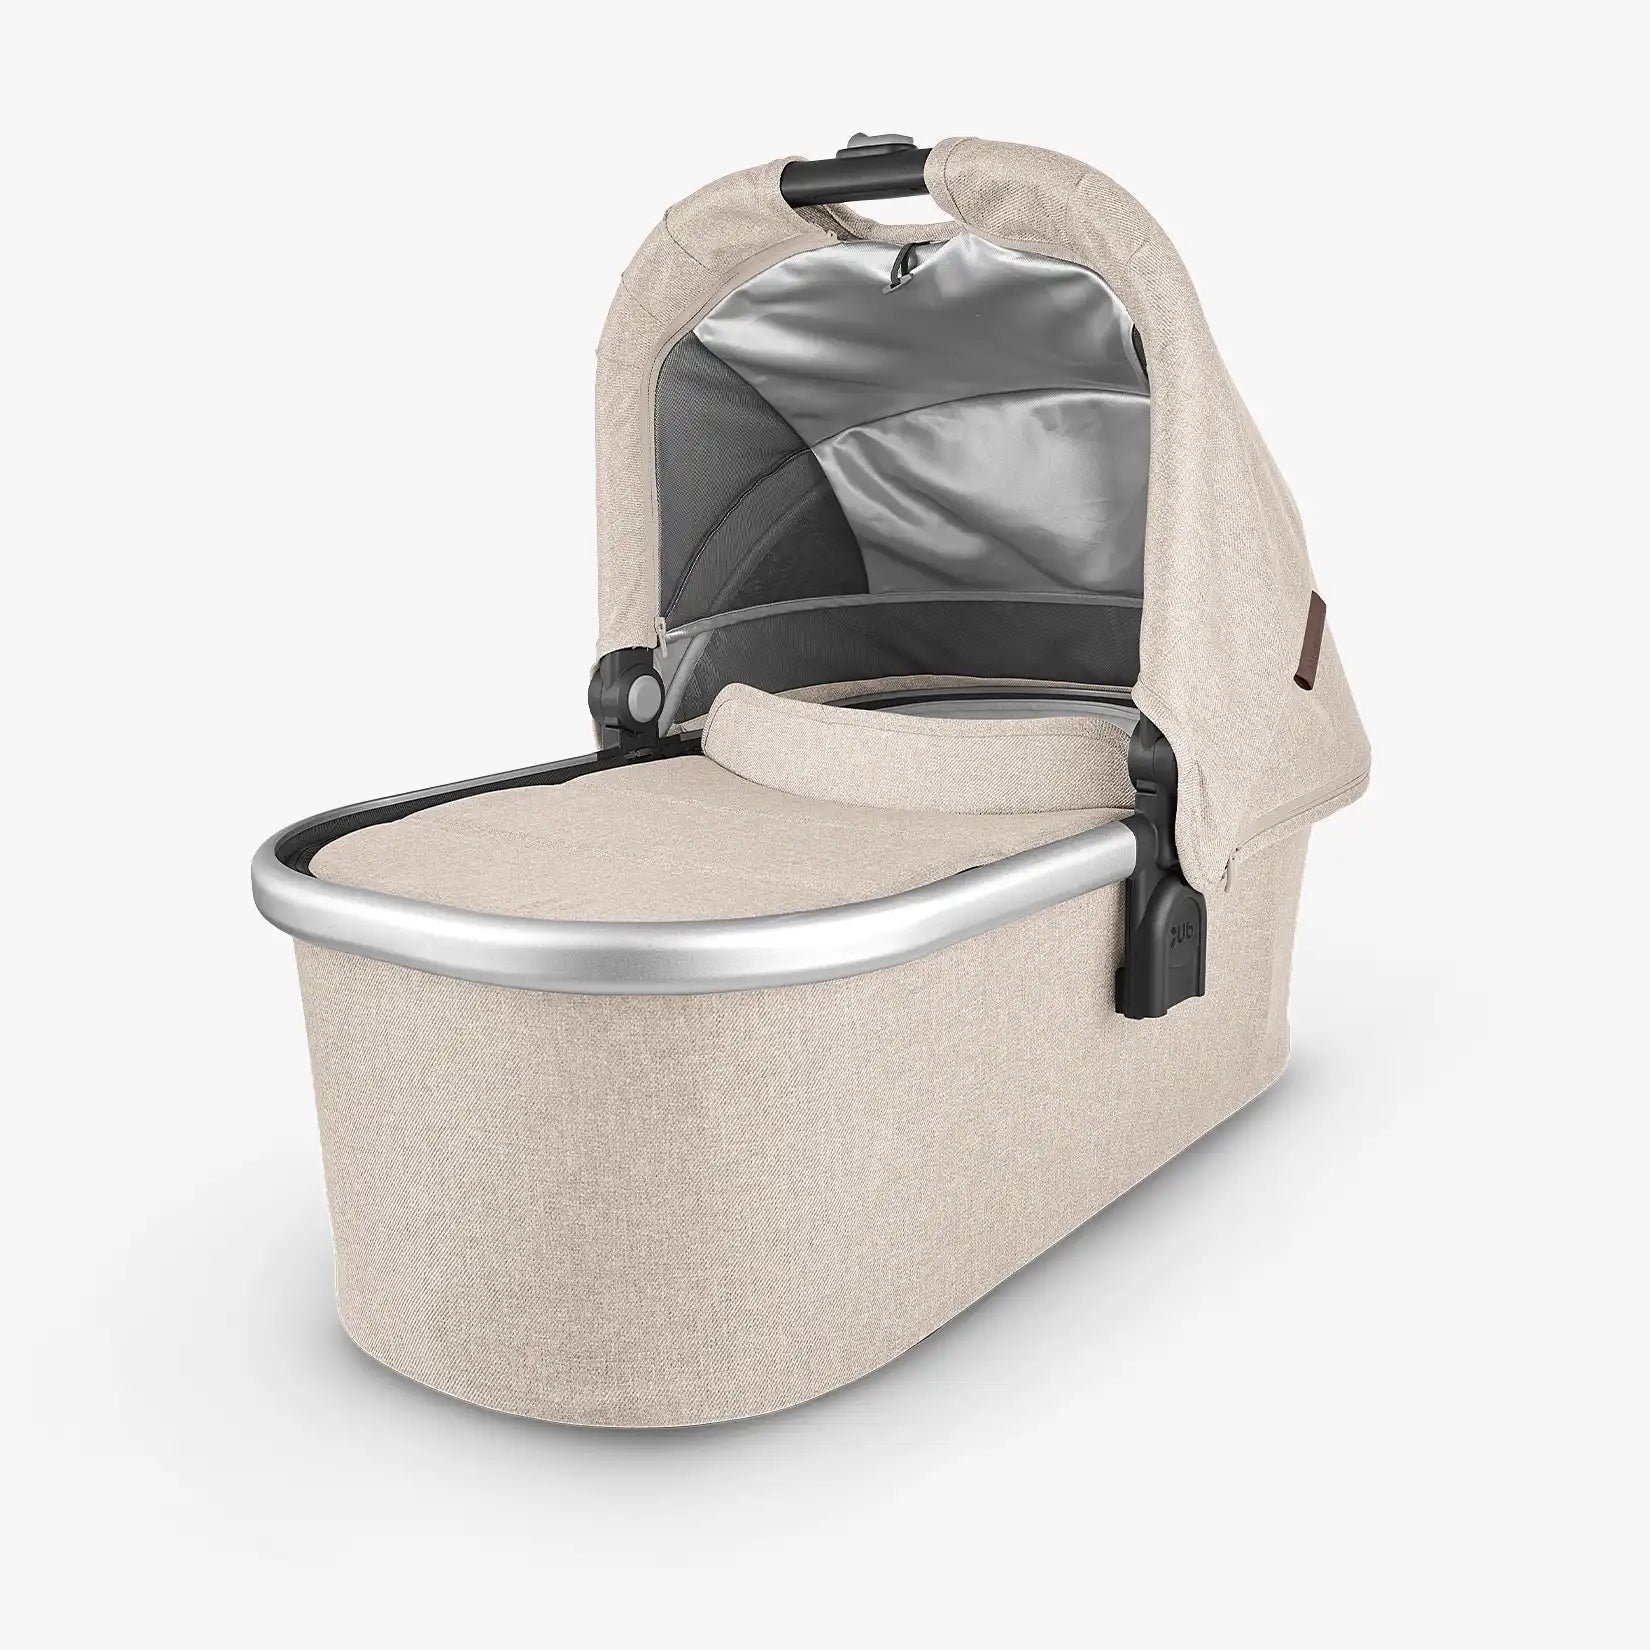 UPPAbaby Bassinet - ANB Baby -810030093305$100 - $300